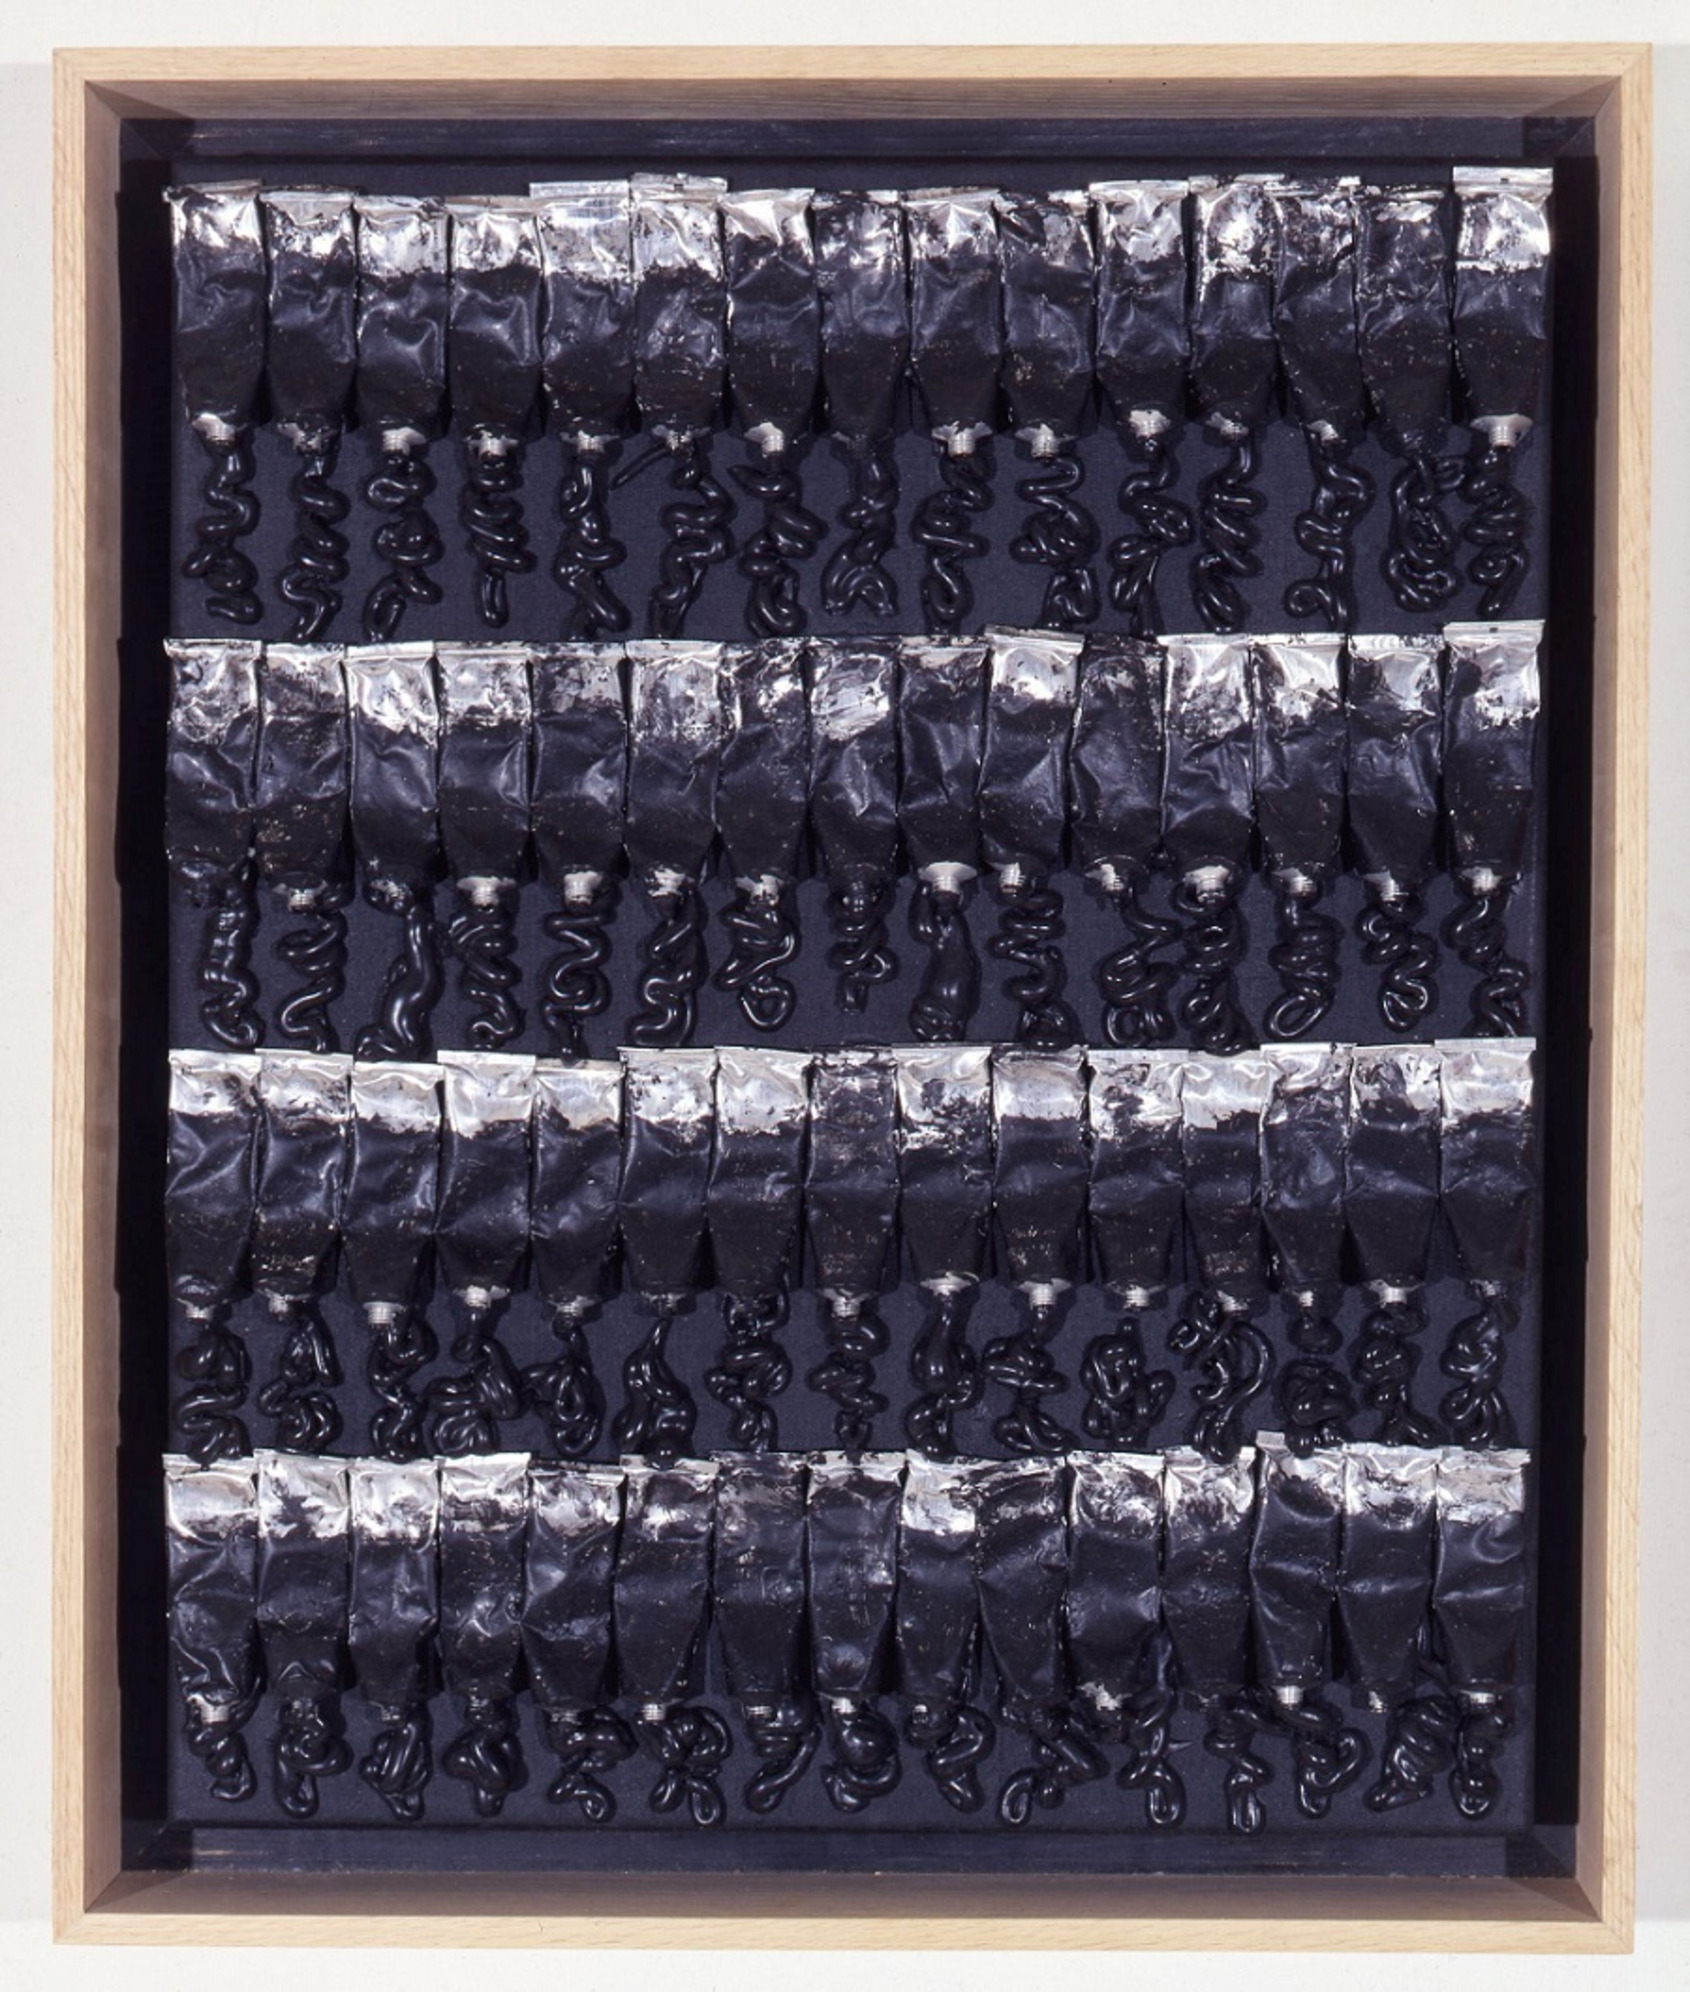 Monochrome No.15, Arman, 1988, 64 x 54 cm. Accumulation of acrylic paint and tubes on canvas. Courtesy of The Arman Marital Trust. 